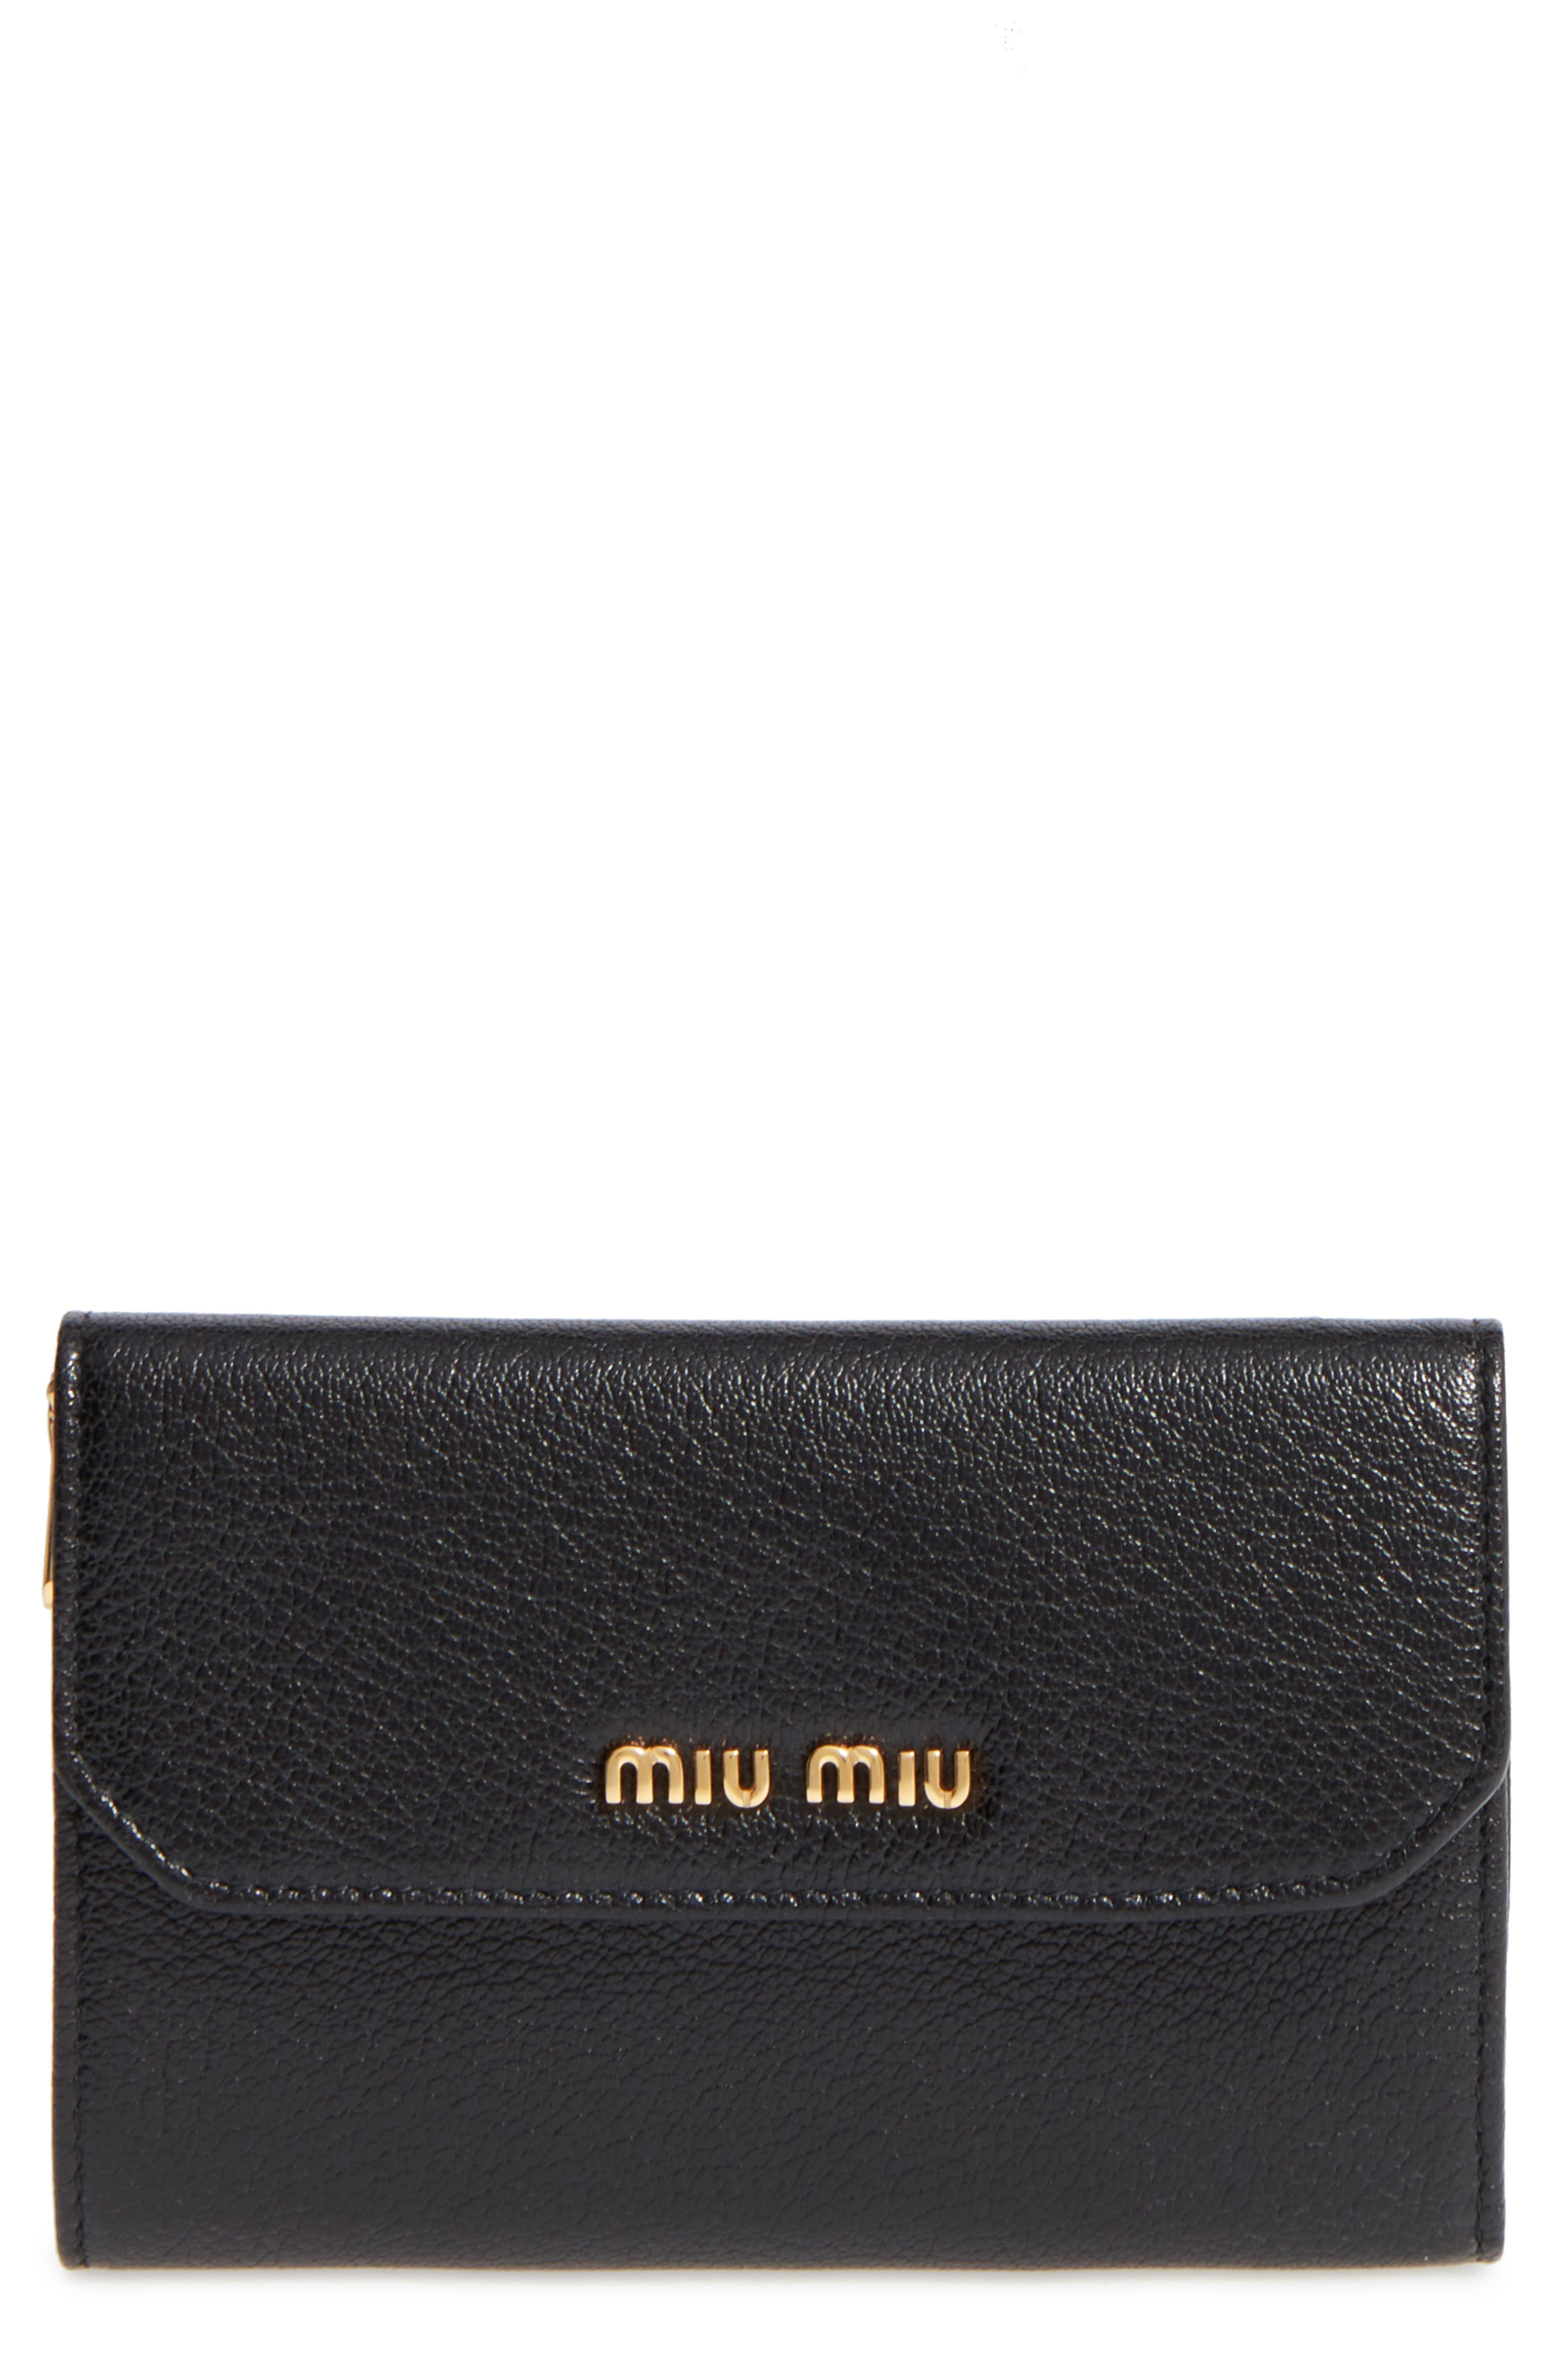 Miu Miu Madras Leather French Wallet | Nordstrom